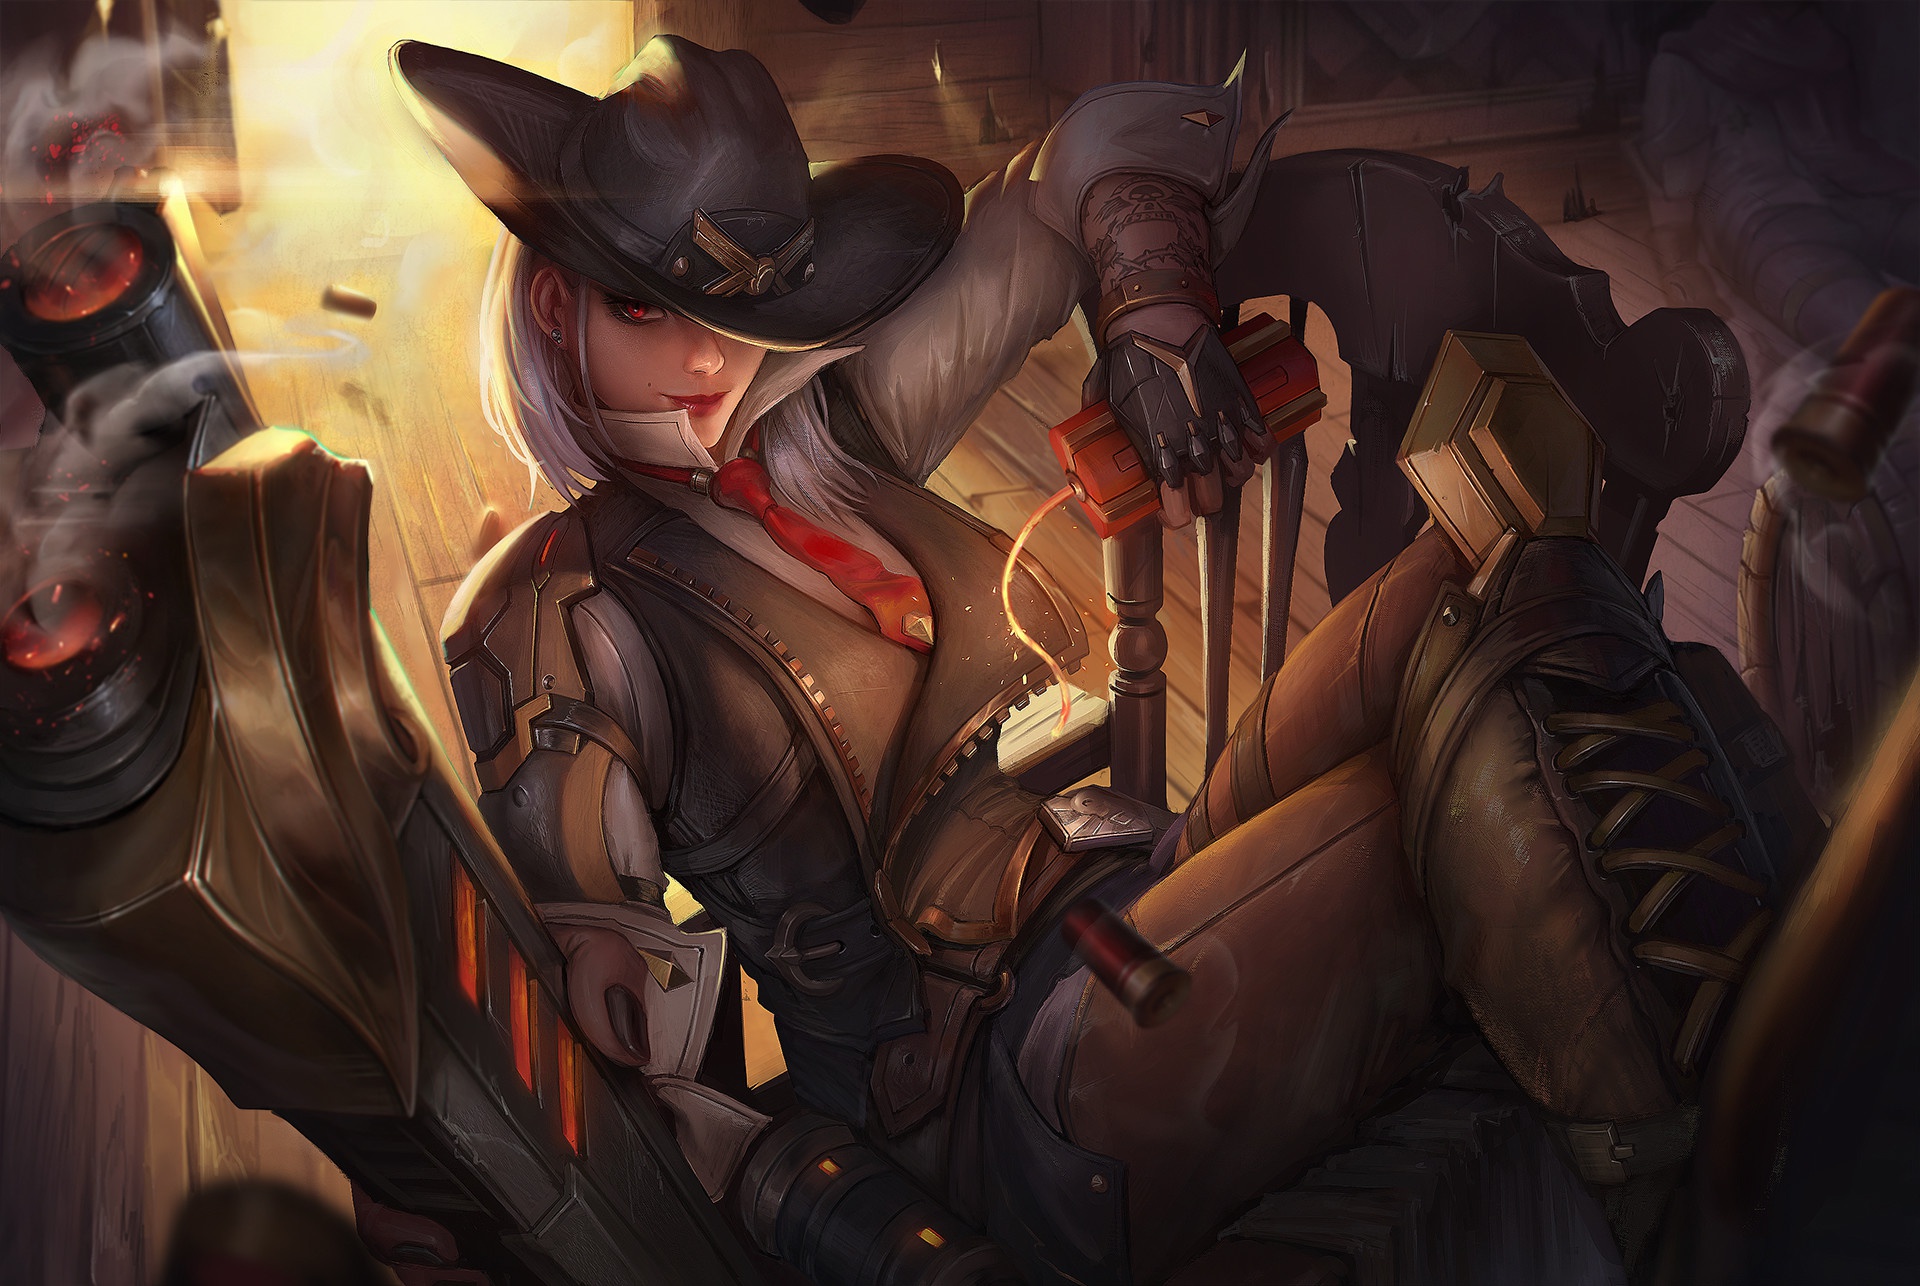 PC Gaming Blizzard Entertainment Video Games Red Eyes Anime Girls Anime Overwatch Ashe Overwatch 1920x1286